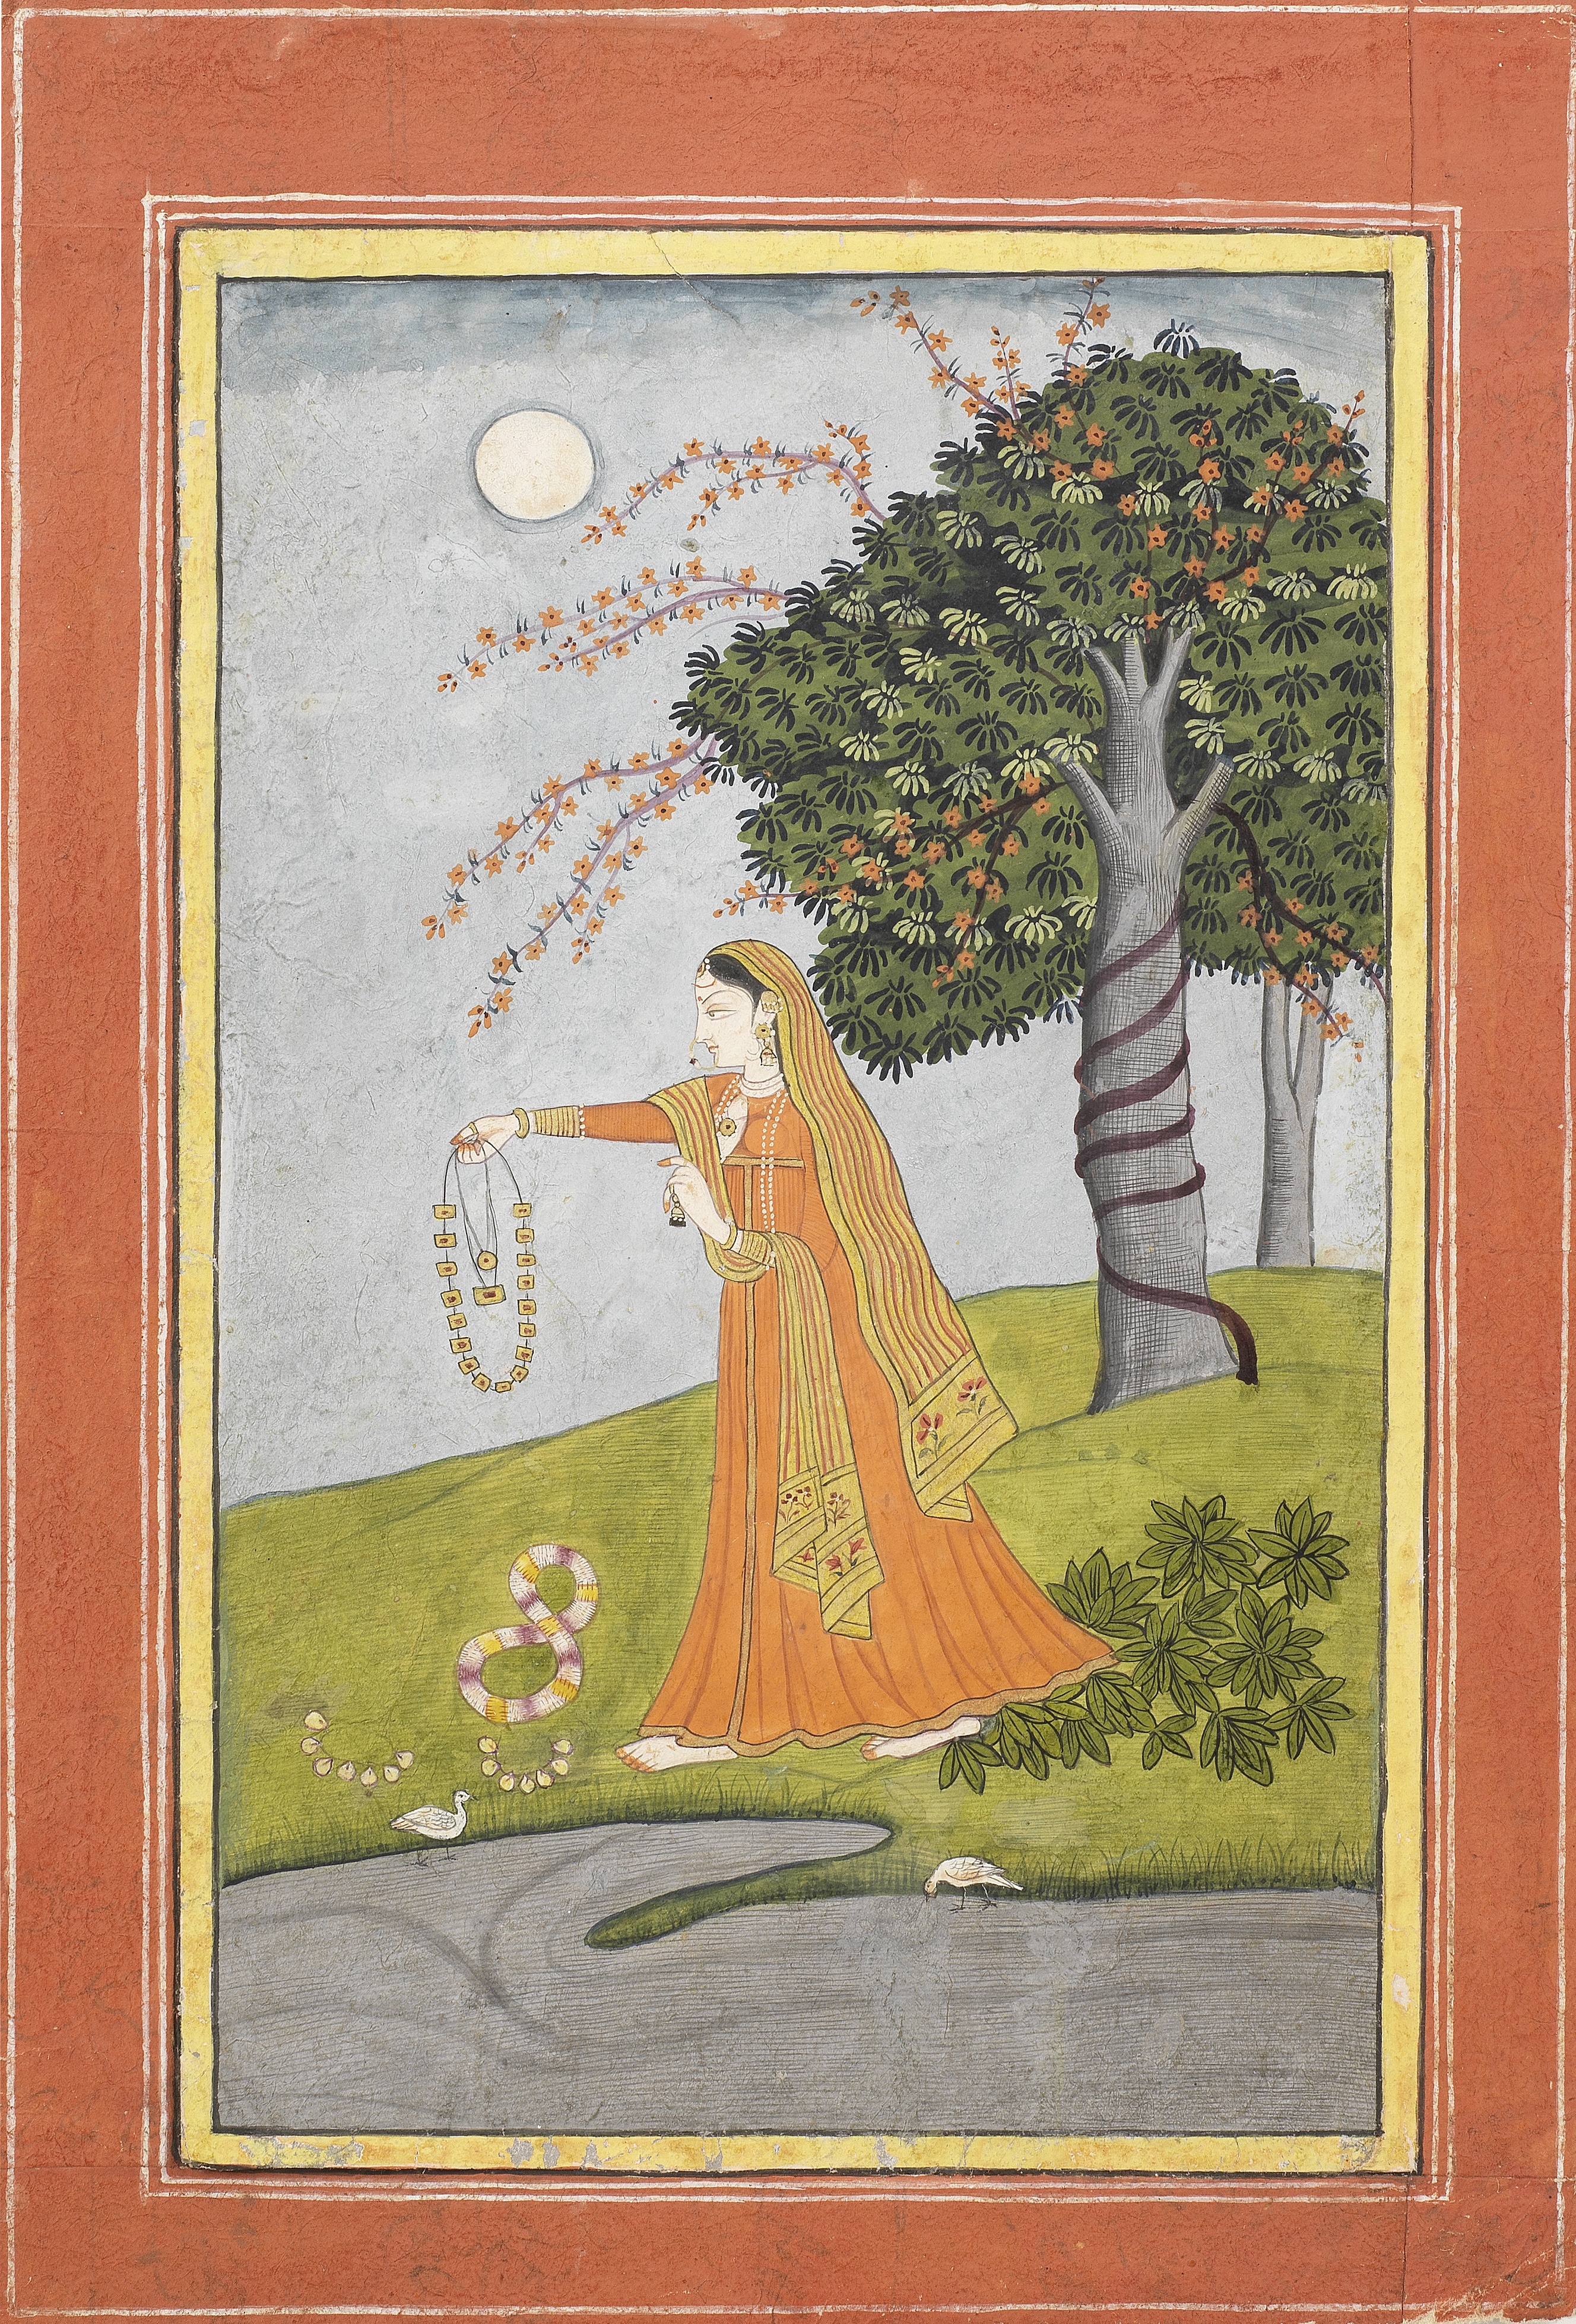 A nayika in a forest, making offerings at a river bank Pahari, circa 1850-60